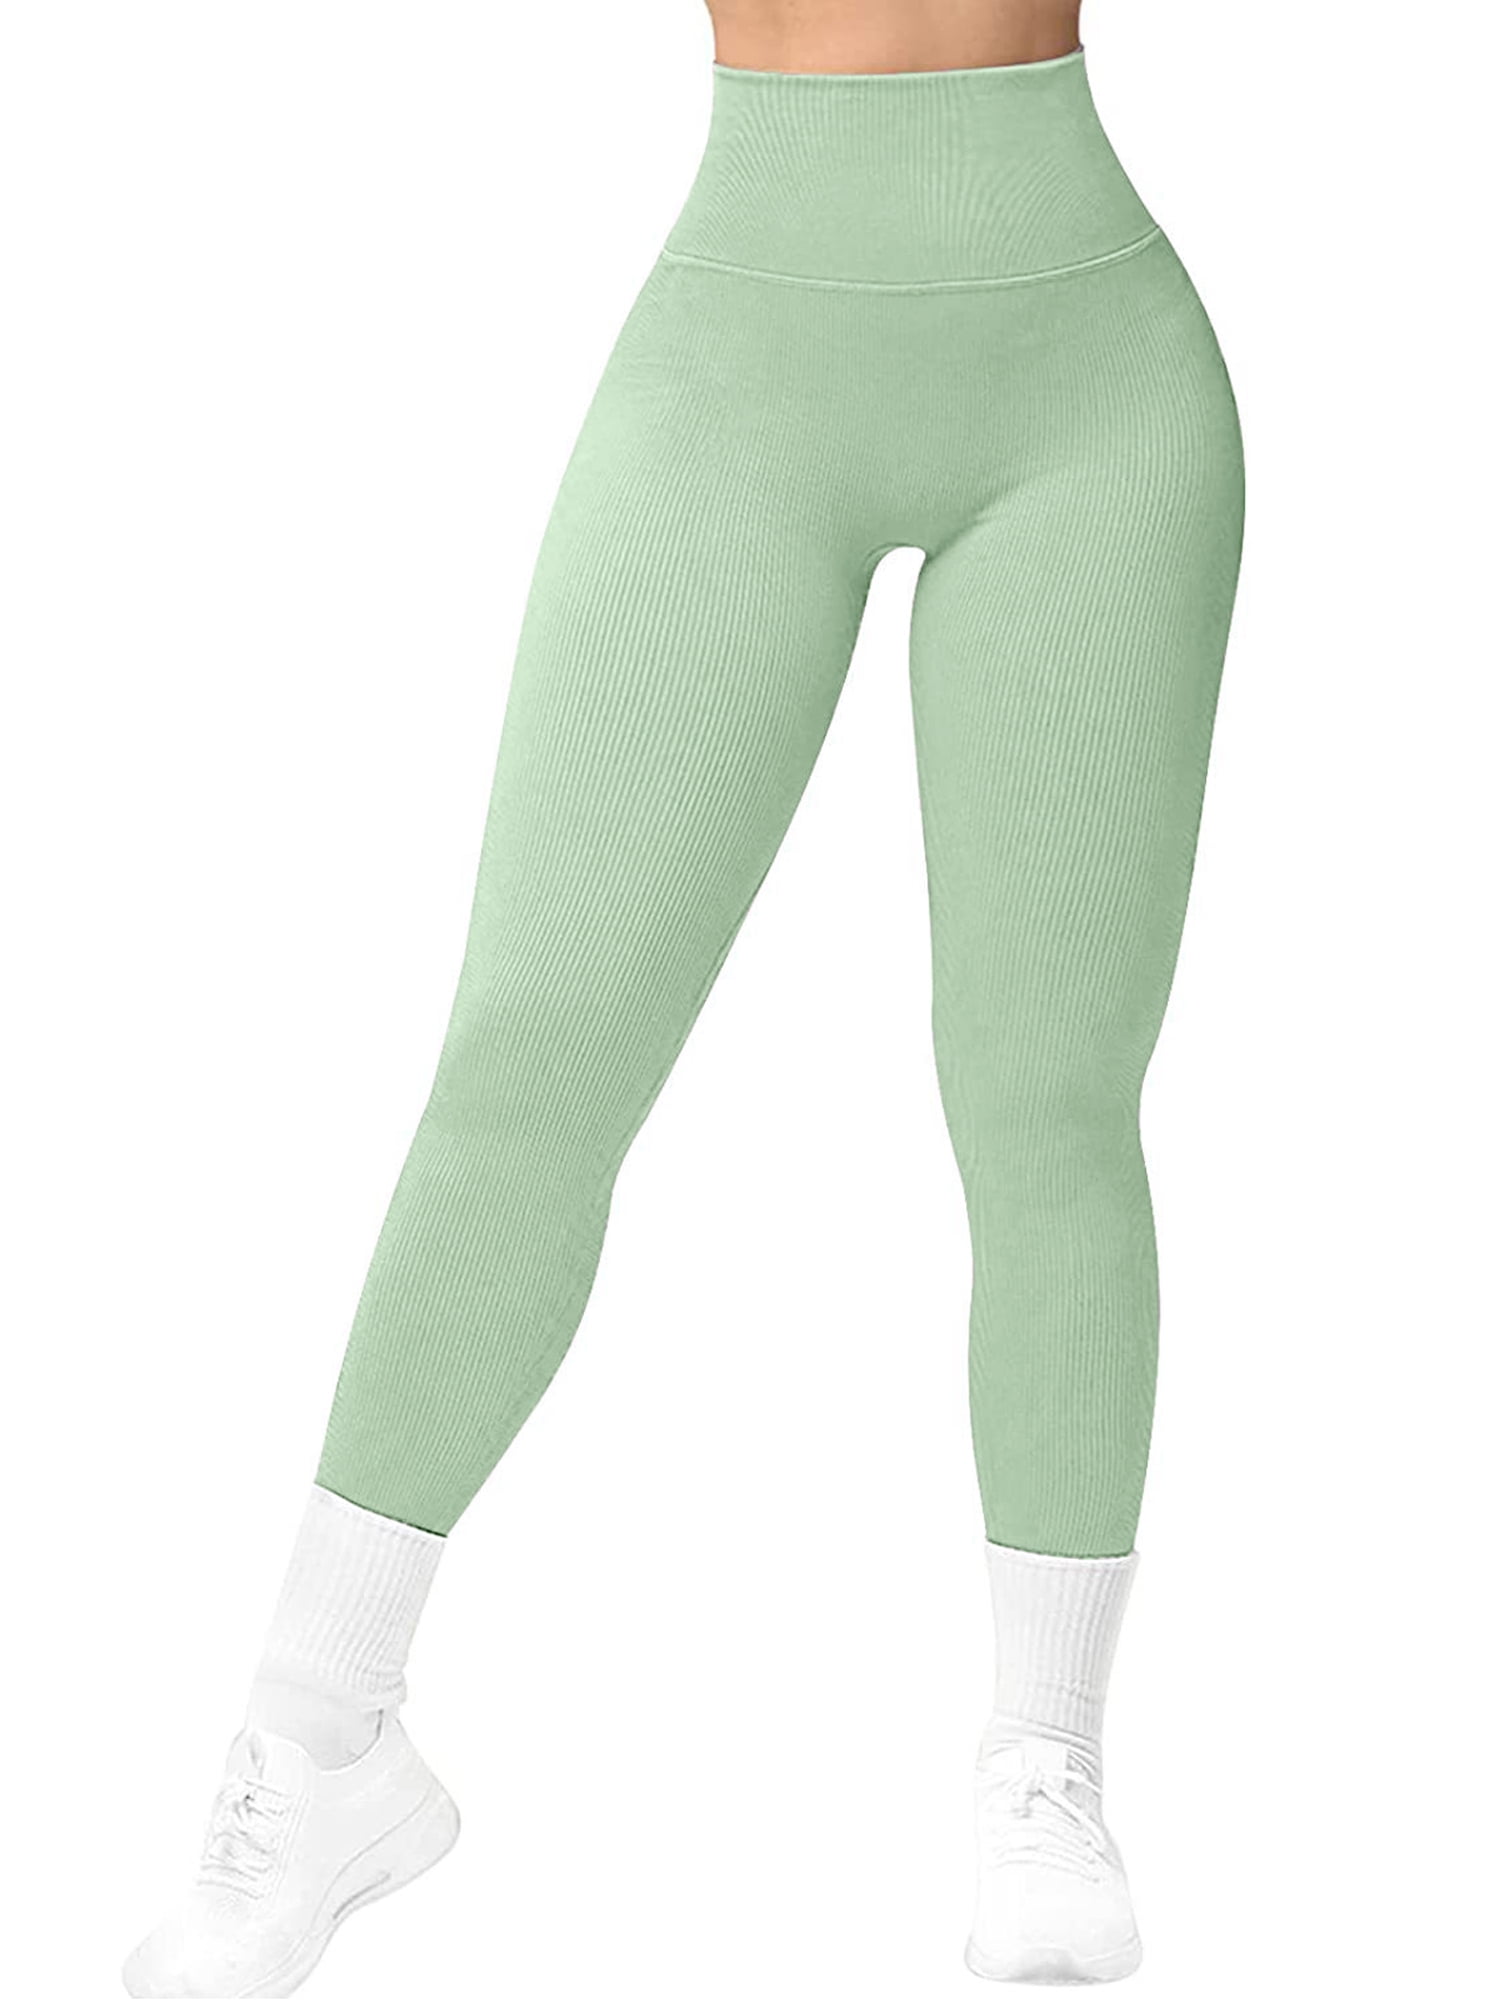 Women's Solid Color Sports Leggings Non See Through High Waisted